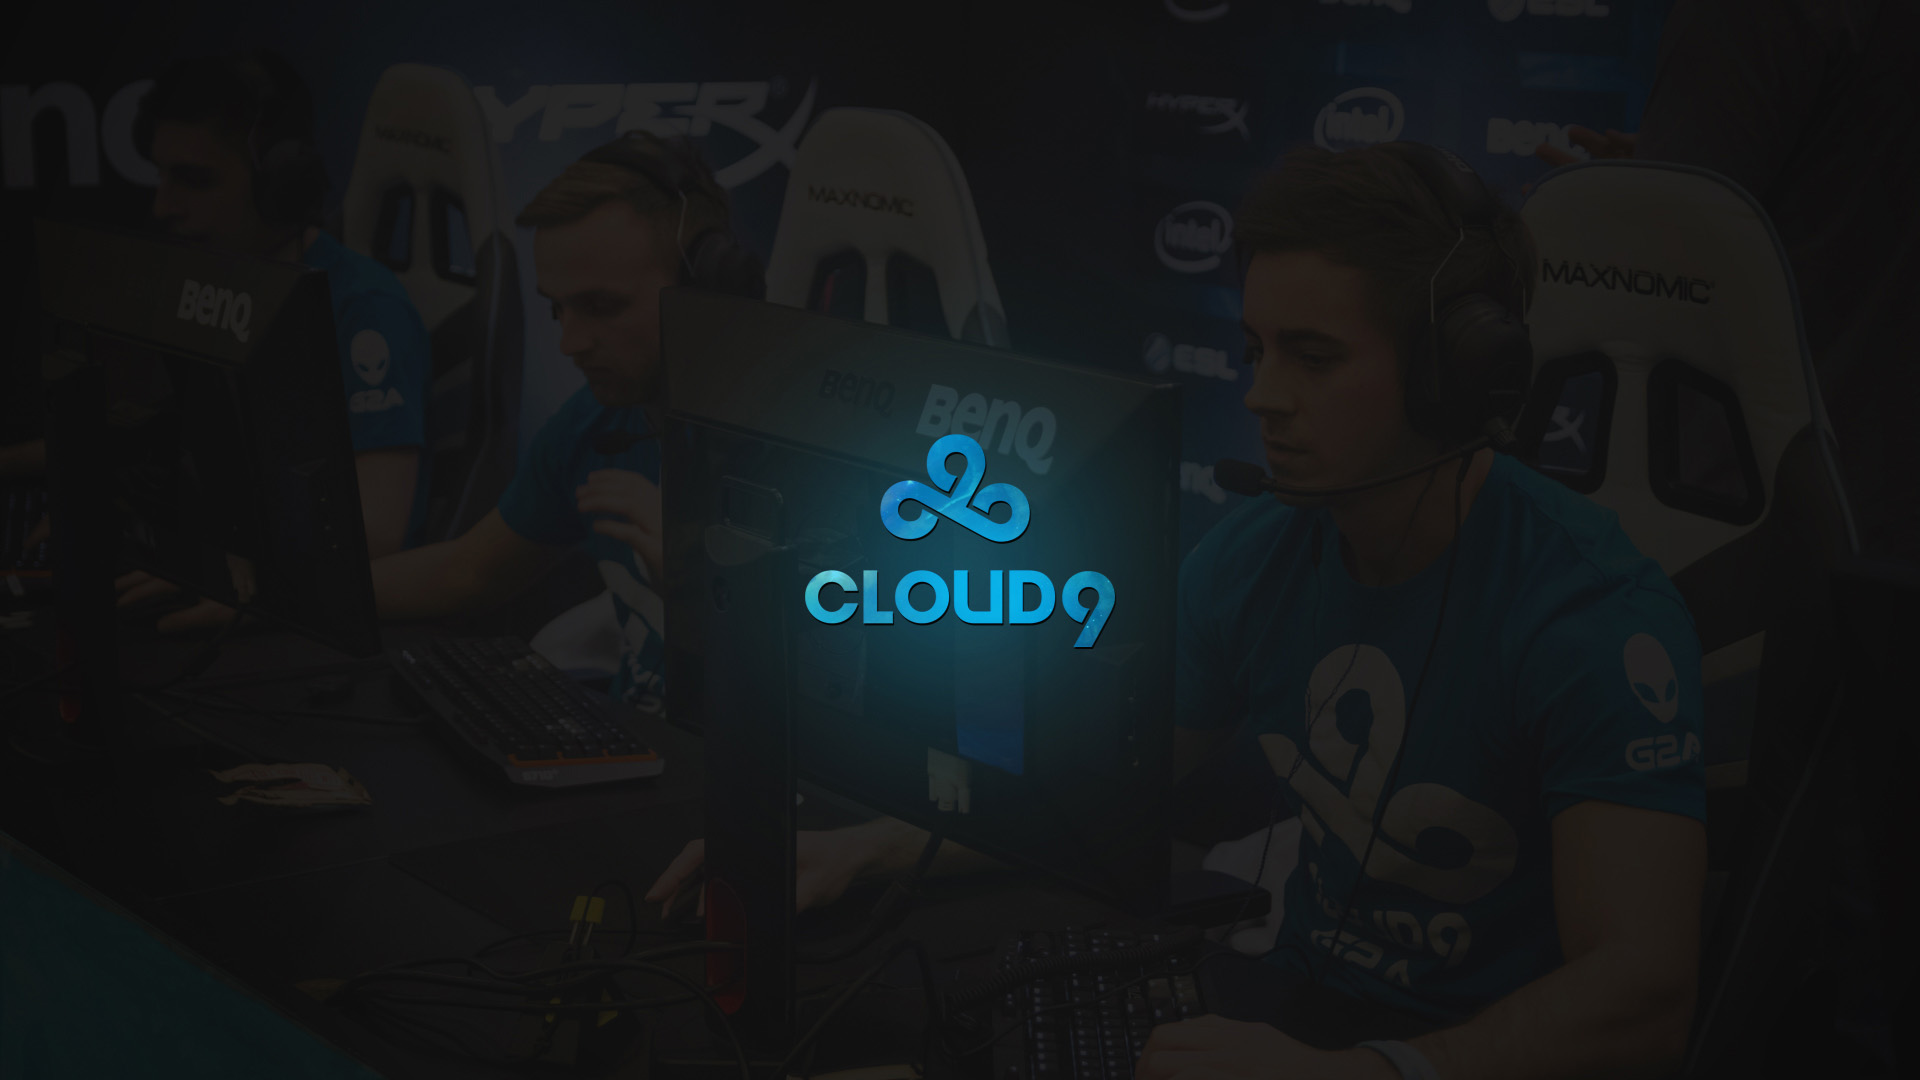 Wallpaper Include Of The Cloud9 Cs Go Team And